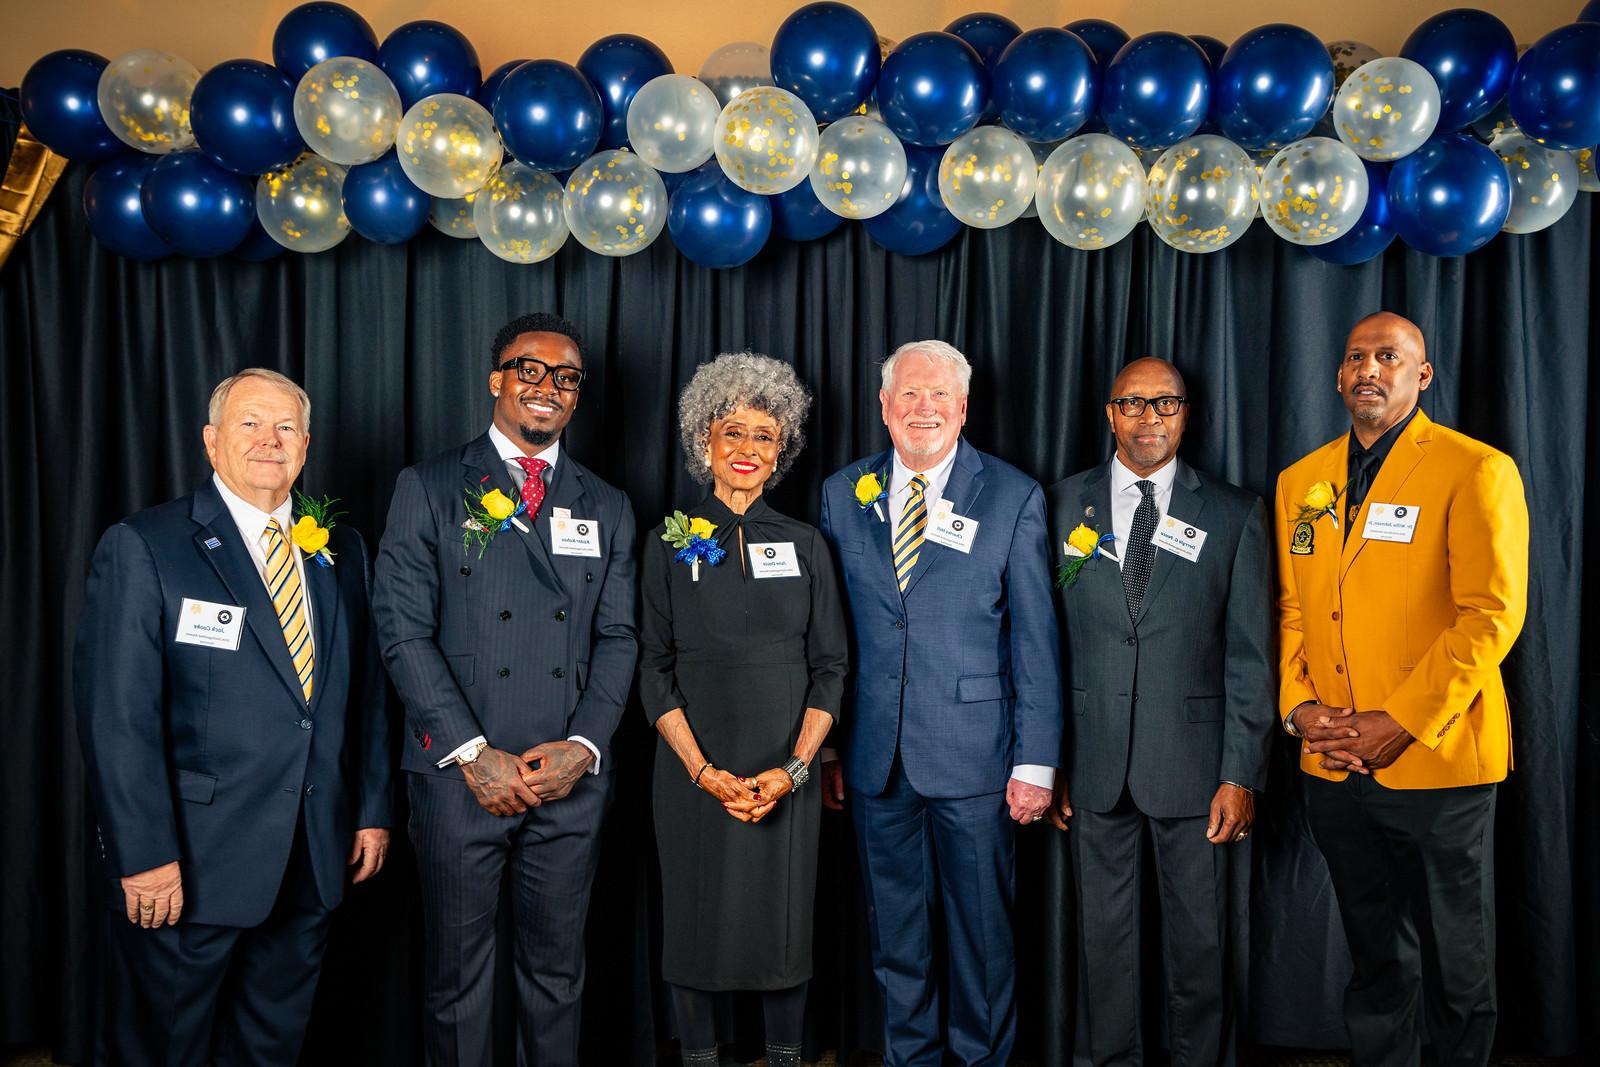 The six award recipients line up for a photo in front of a black curtain with gold and blue balloons above their heads.